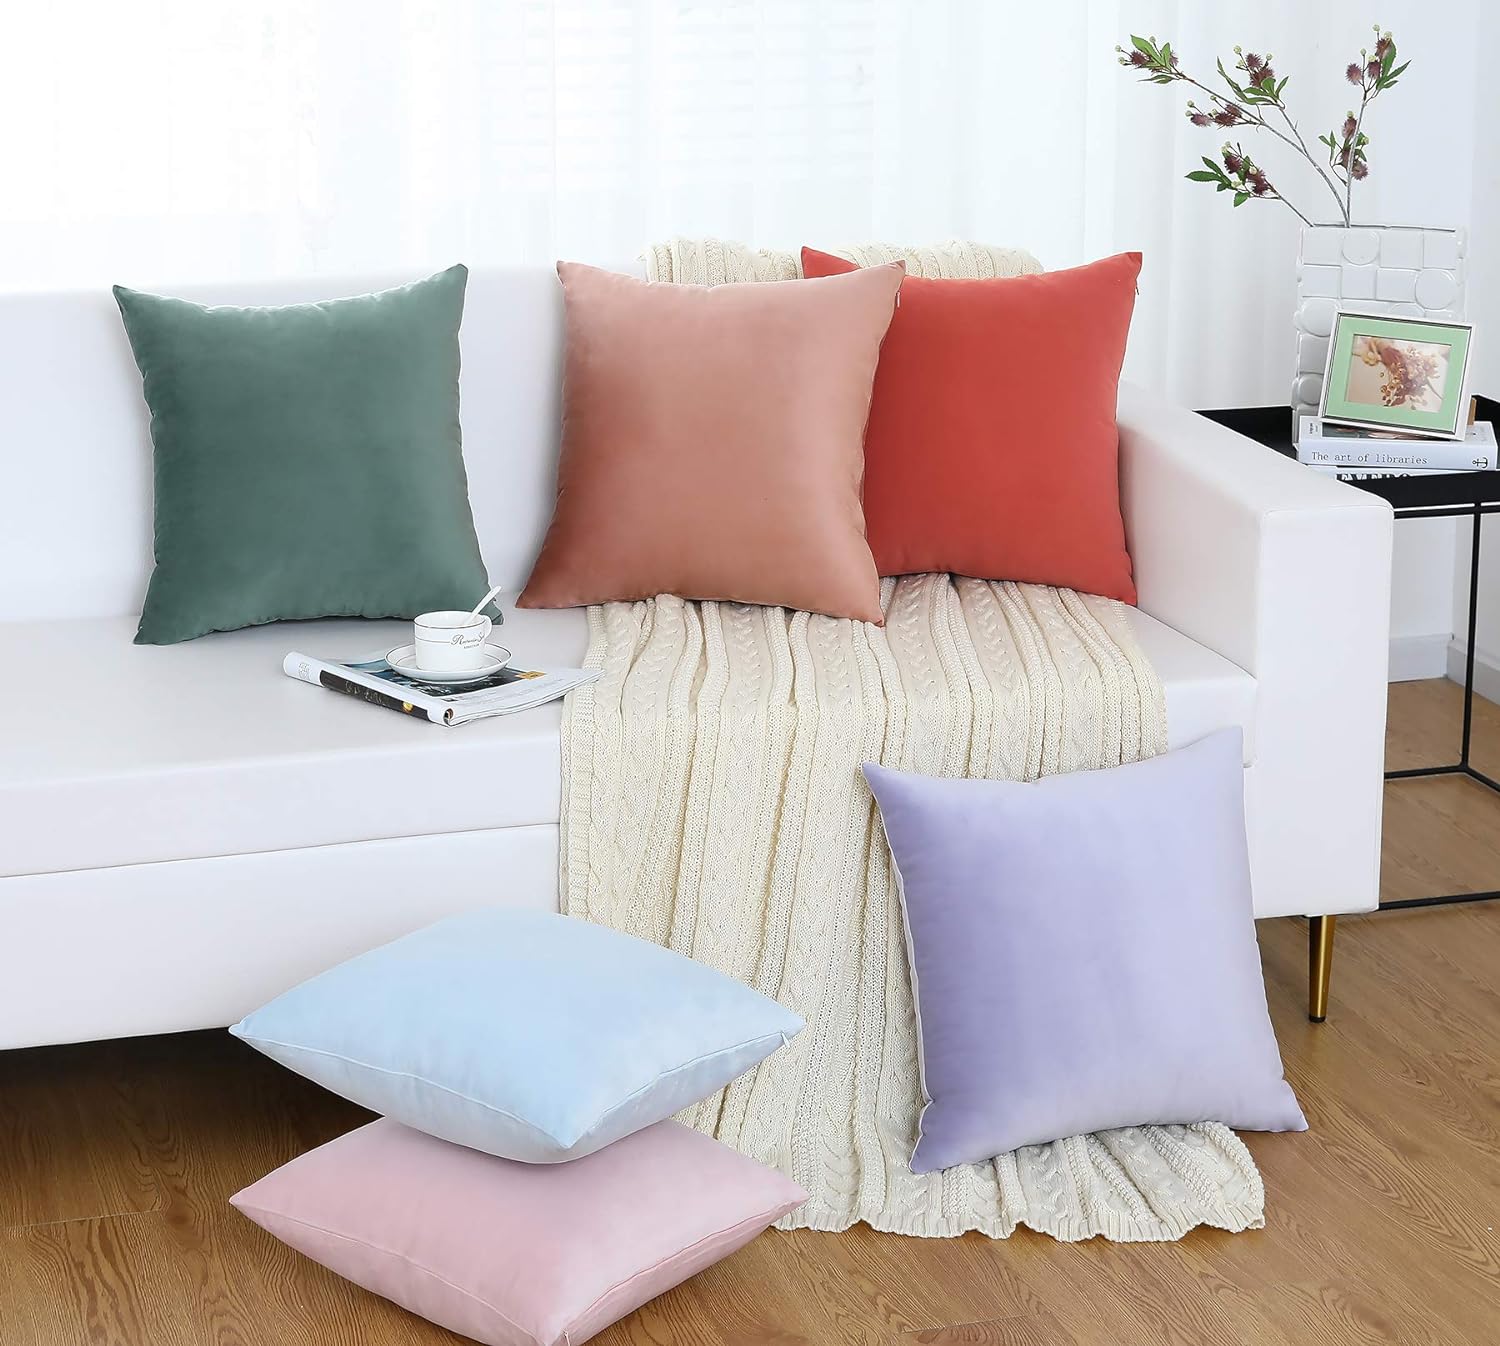 Jeneoo Comfy Soft Thick Velvet Throw Pillow Cases: A Luxurious Addition to Your Home Decor